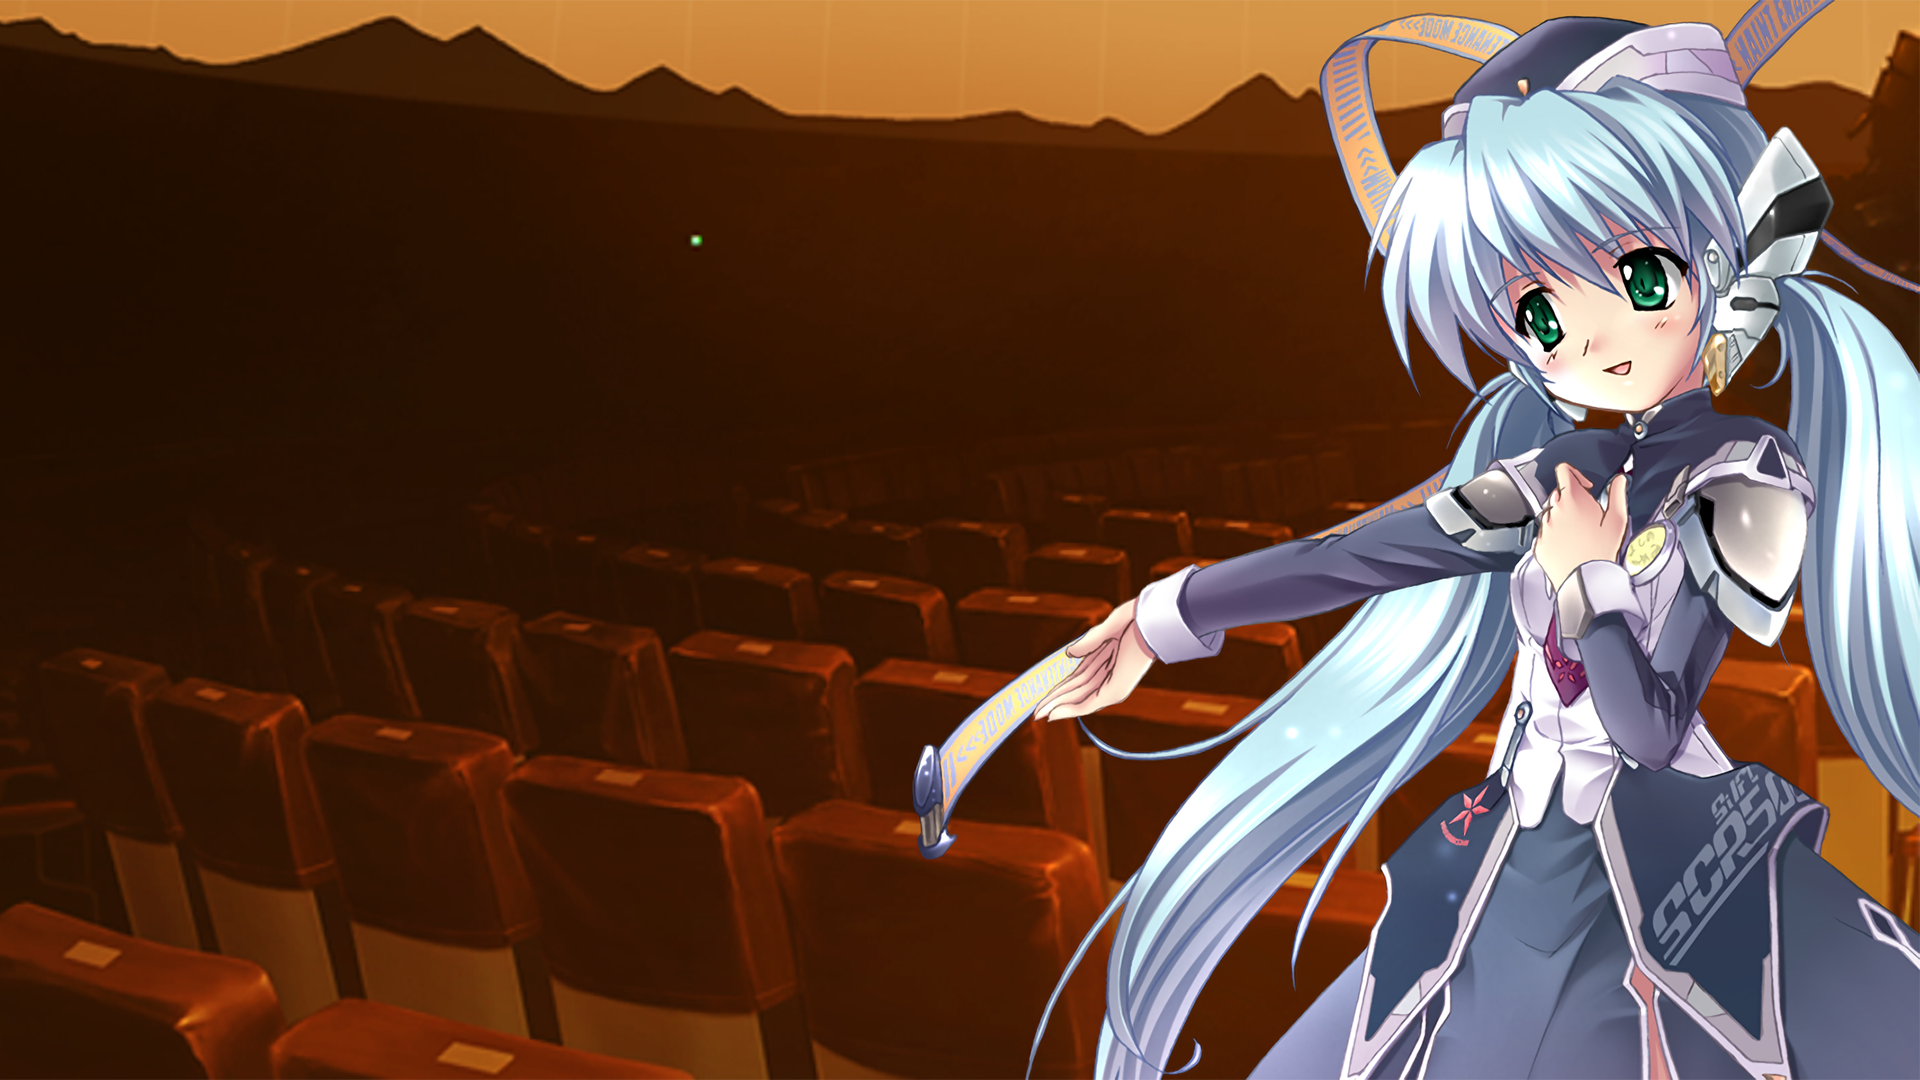 Anime Planetarian: The Reverie of a Little Planet HD Wallpaper | Background Image